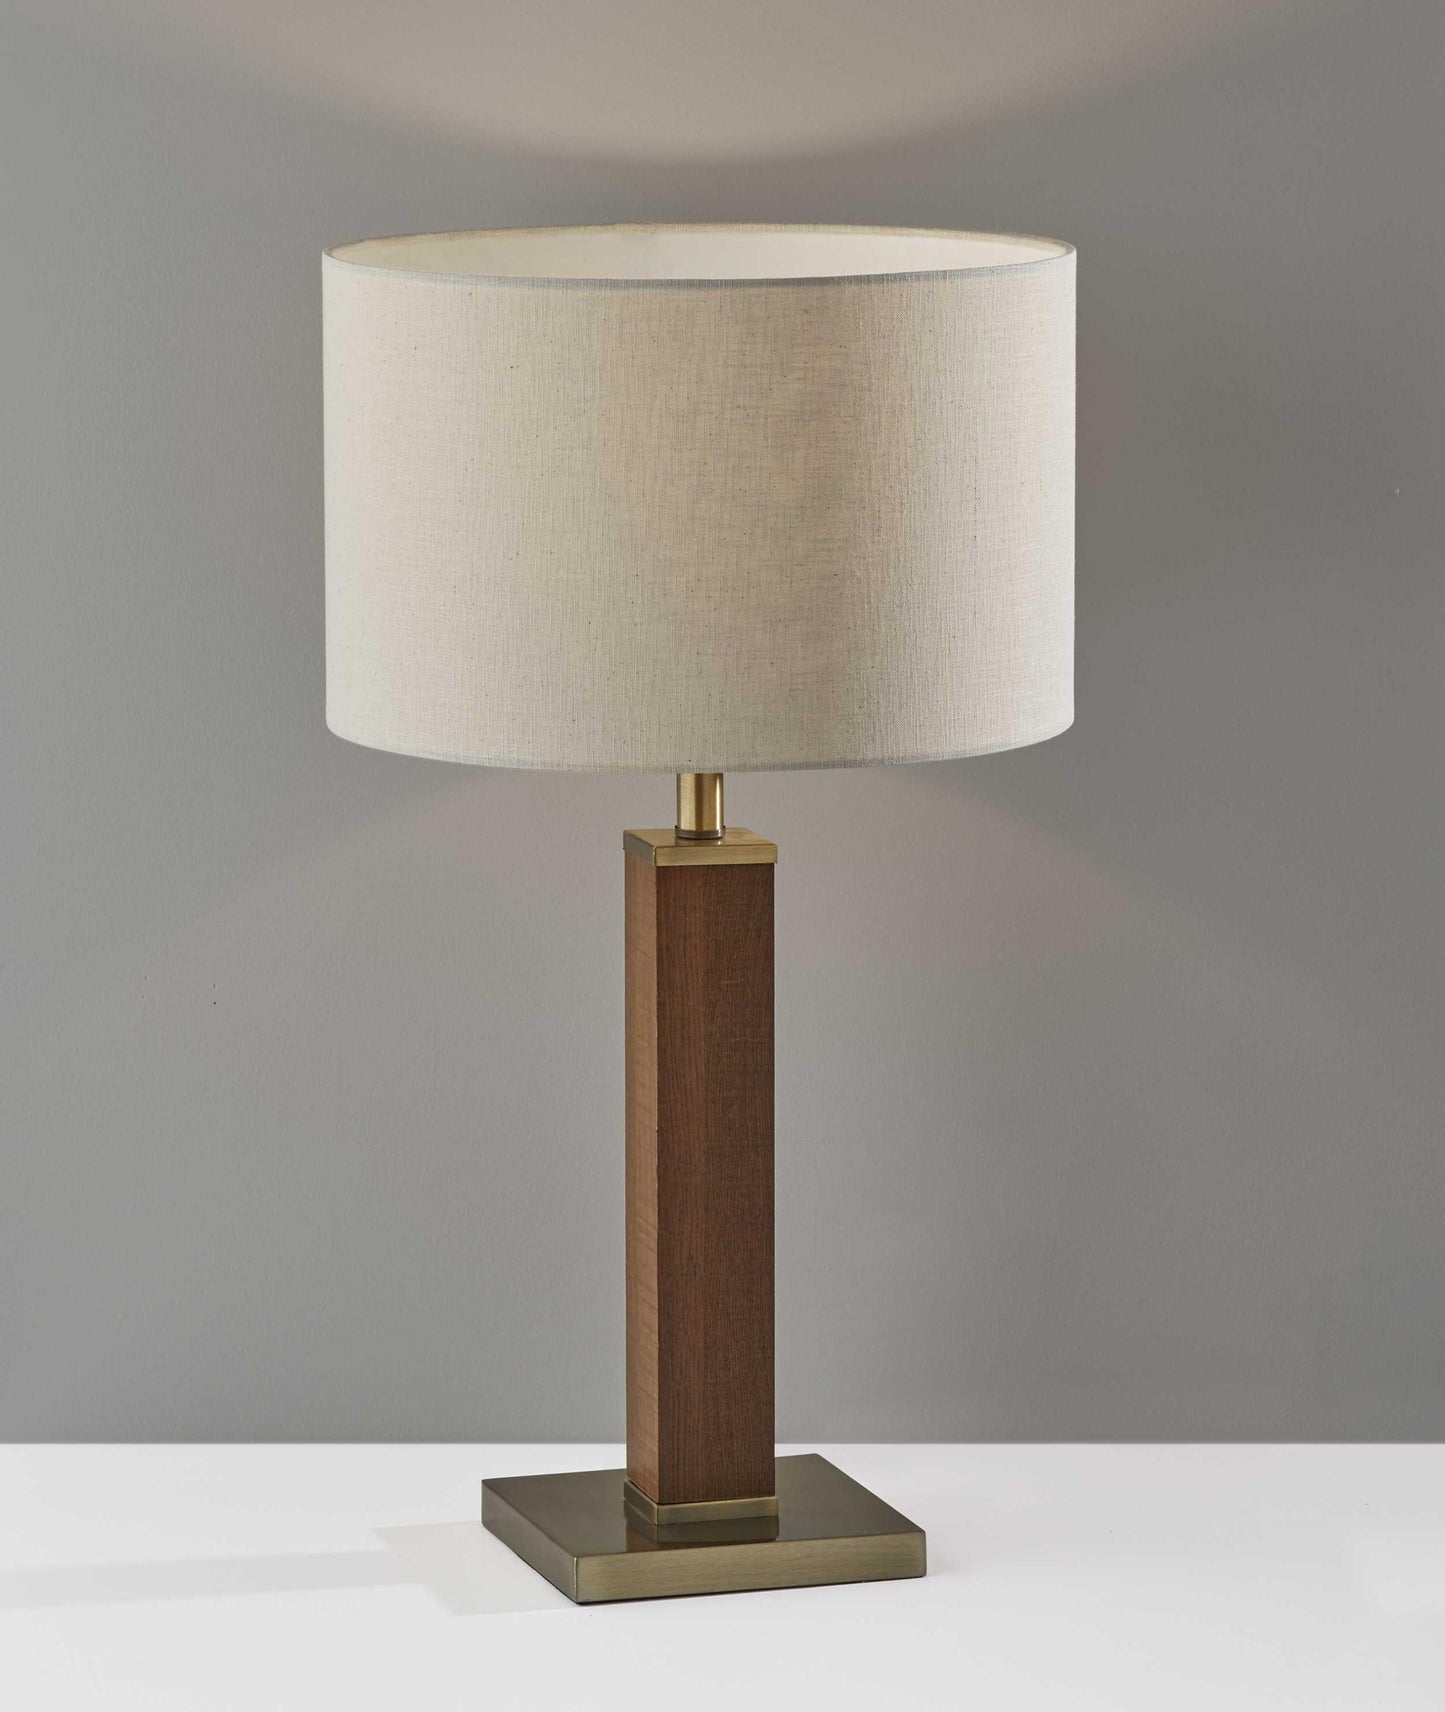 15.5" X 15.5" X 27.75" Antique Brass Wood Table Lamp